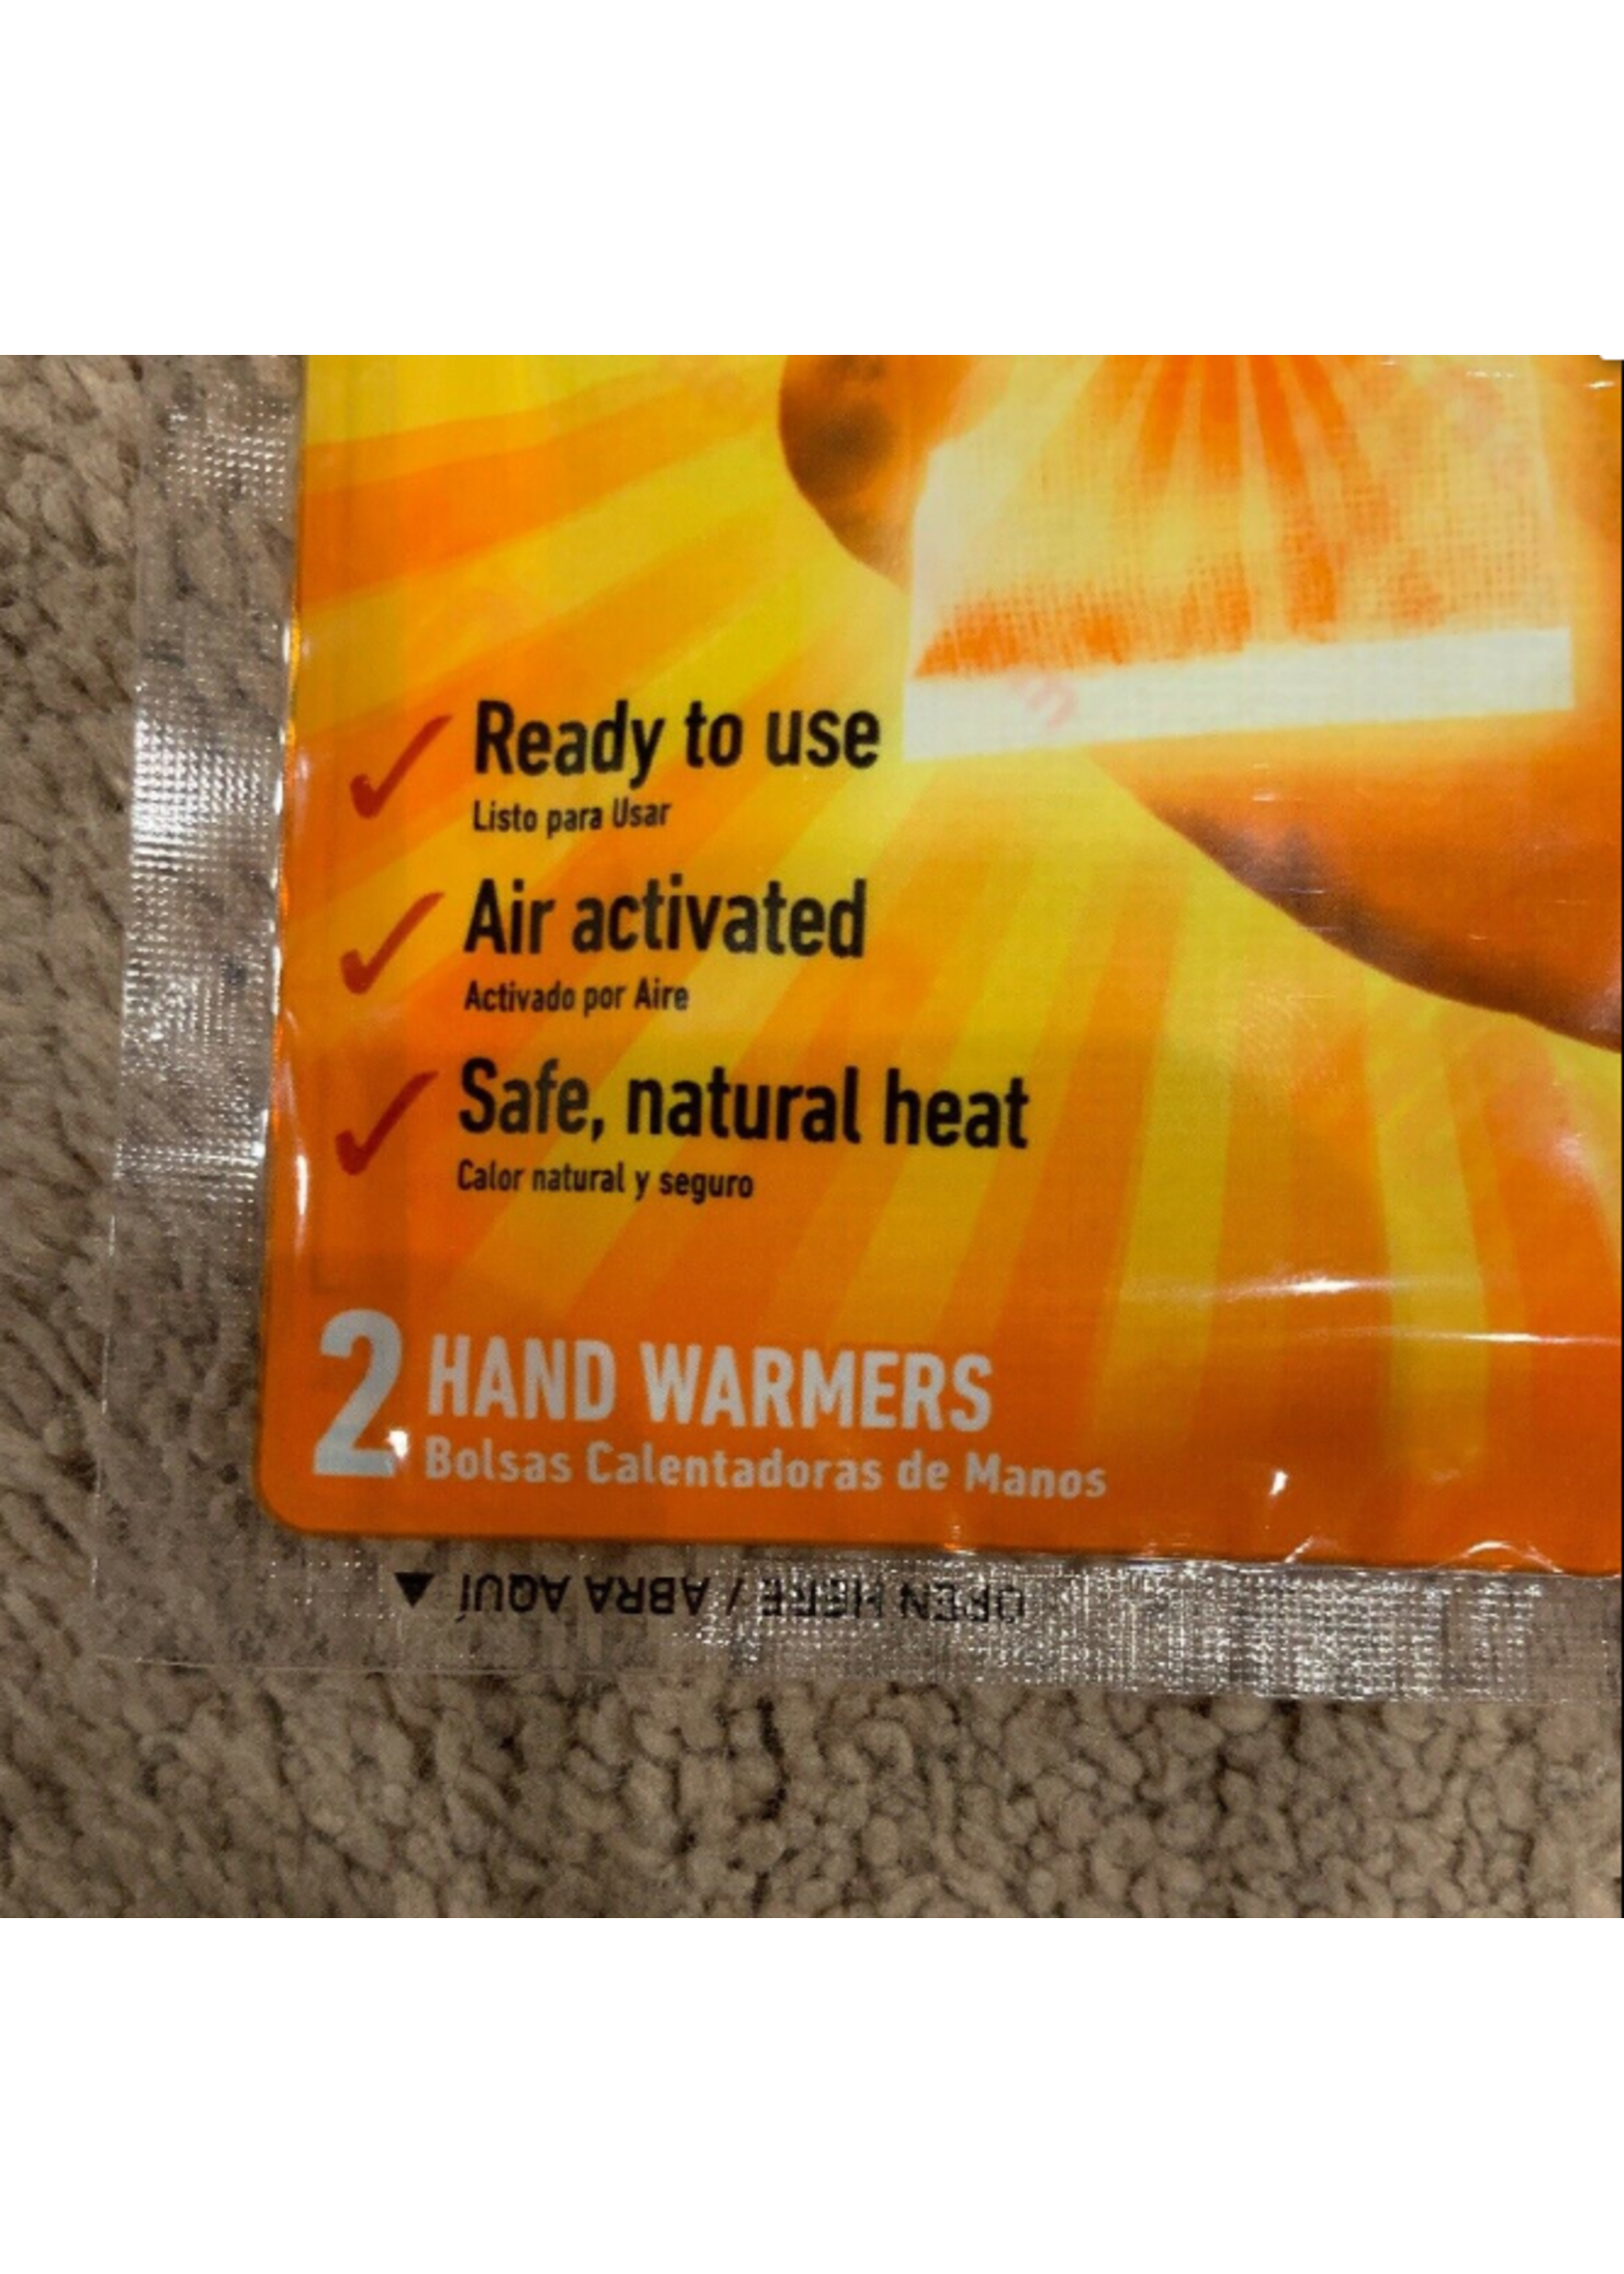 HotHands HotHands Hand Warmers (2 Pack) - 4 Total Hand Warmers